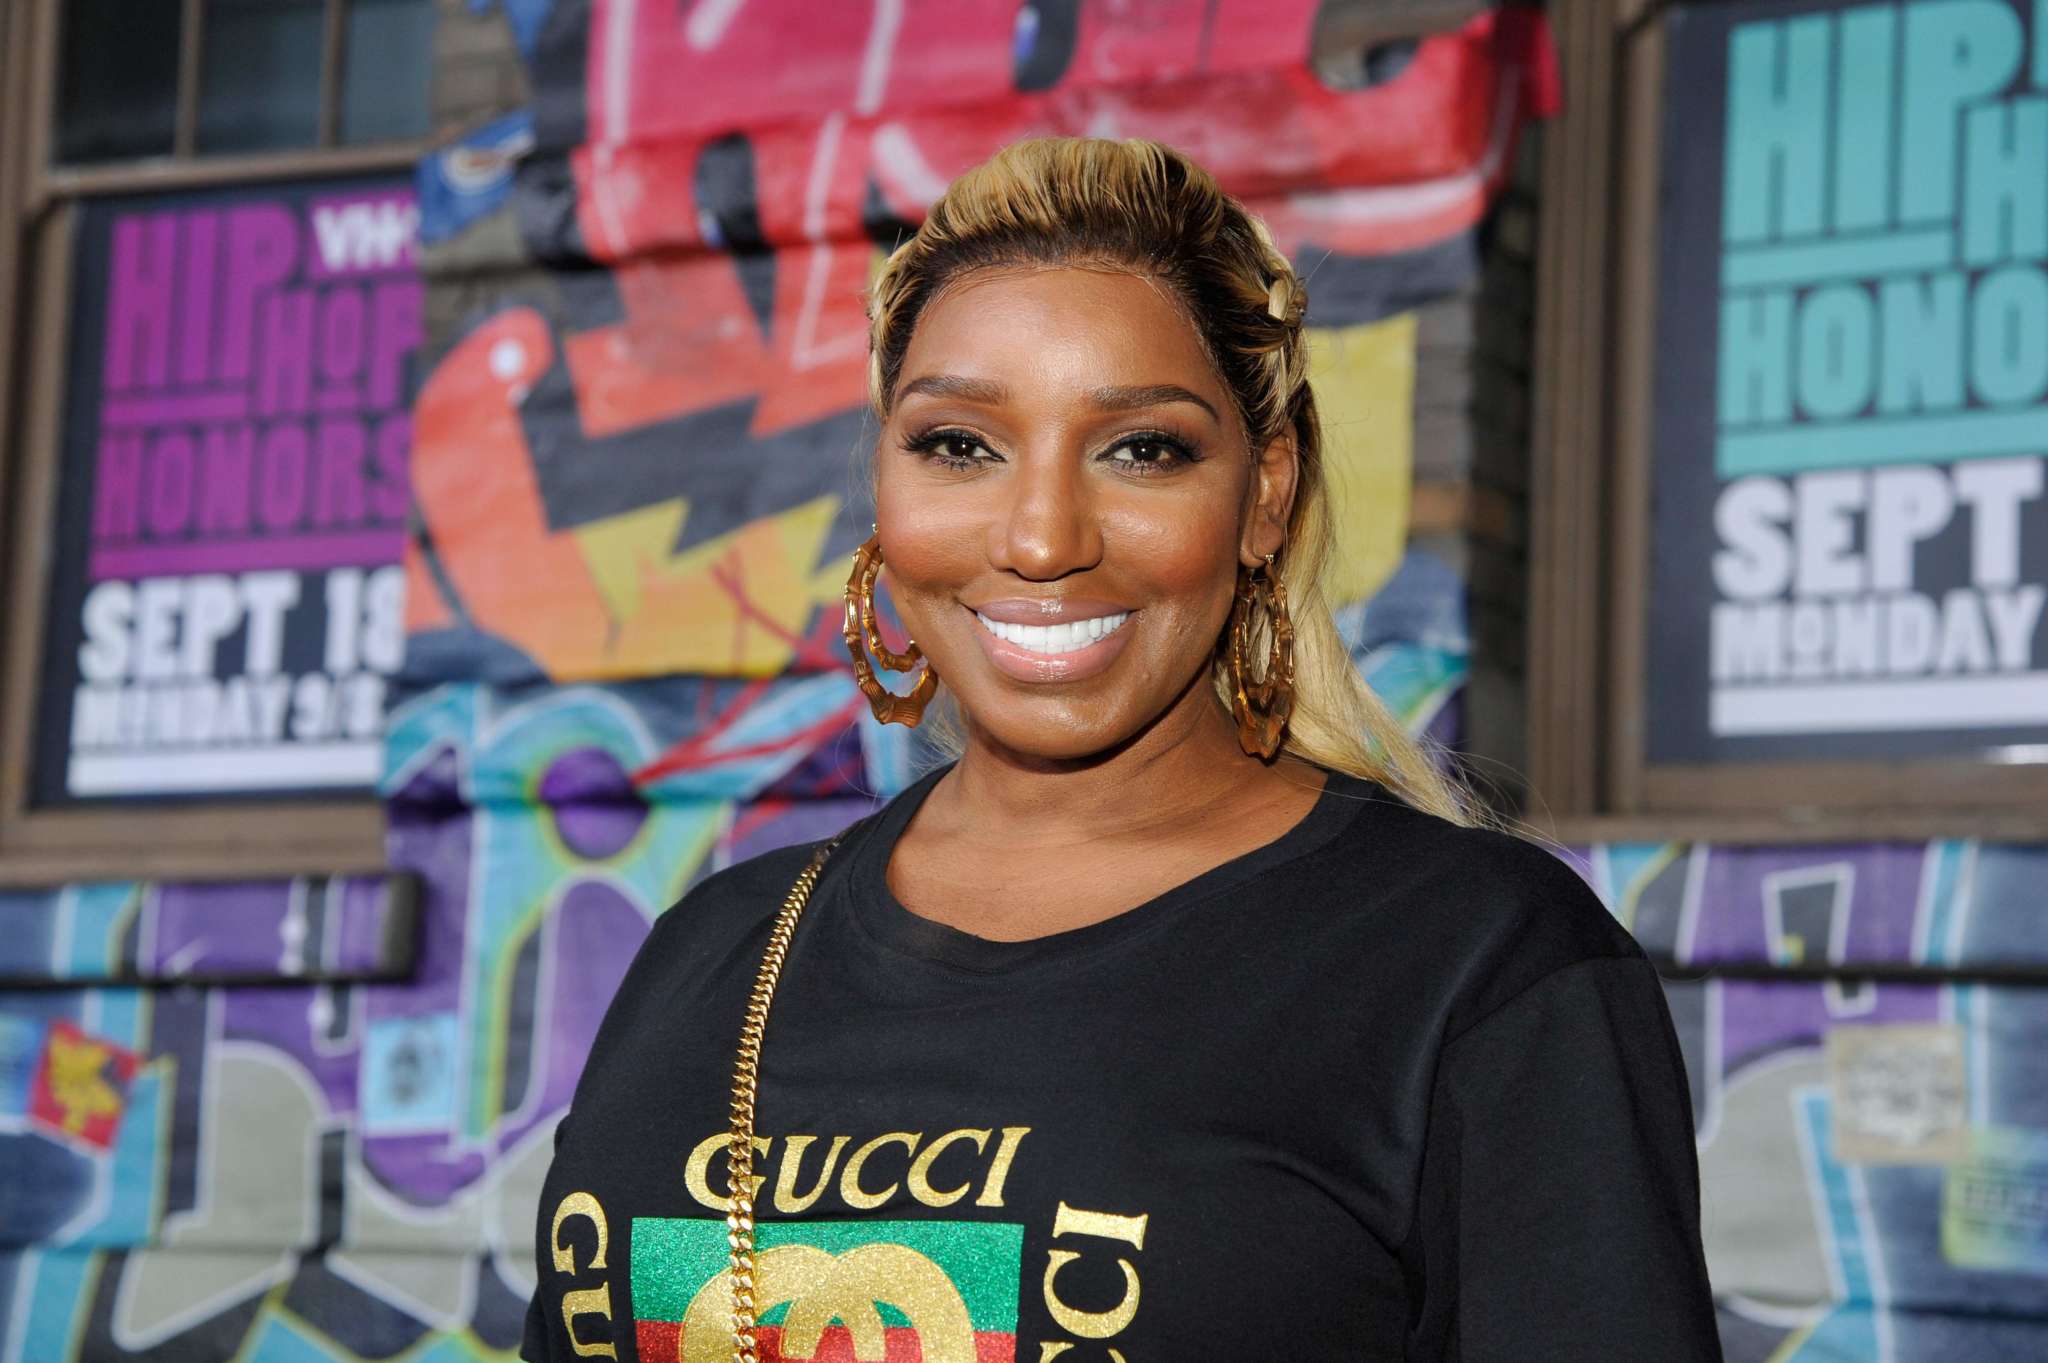 NeNe Leakes Reveals One Of Her 'Hunni Challenge' Winners - Check Out The Group's Dance Here